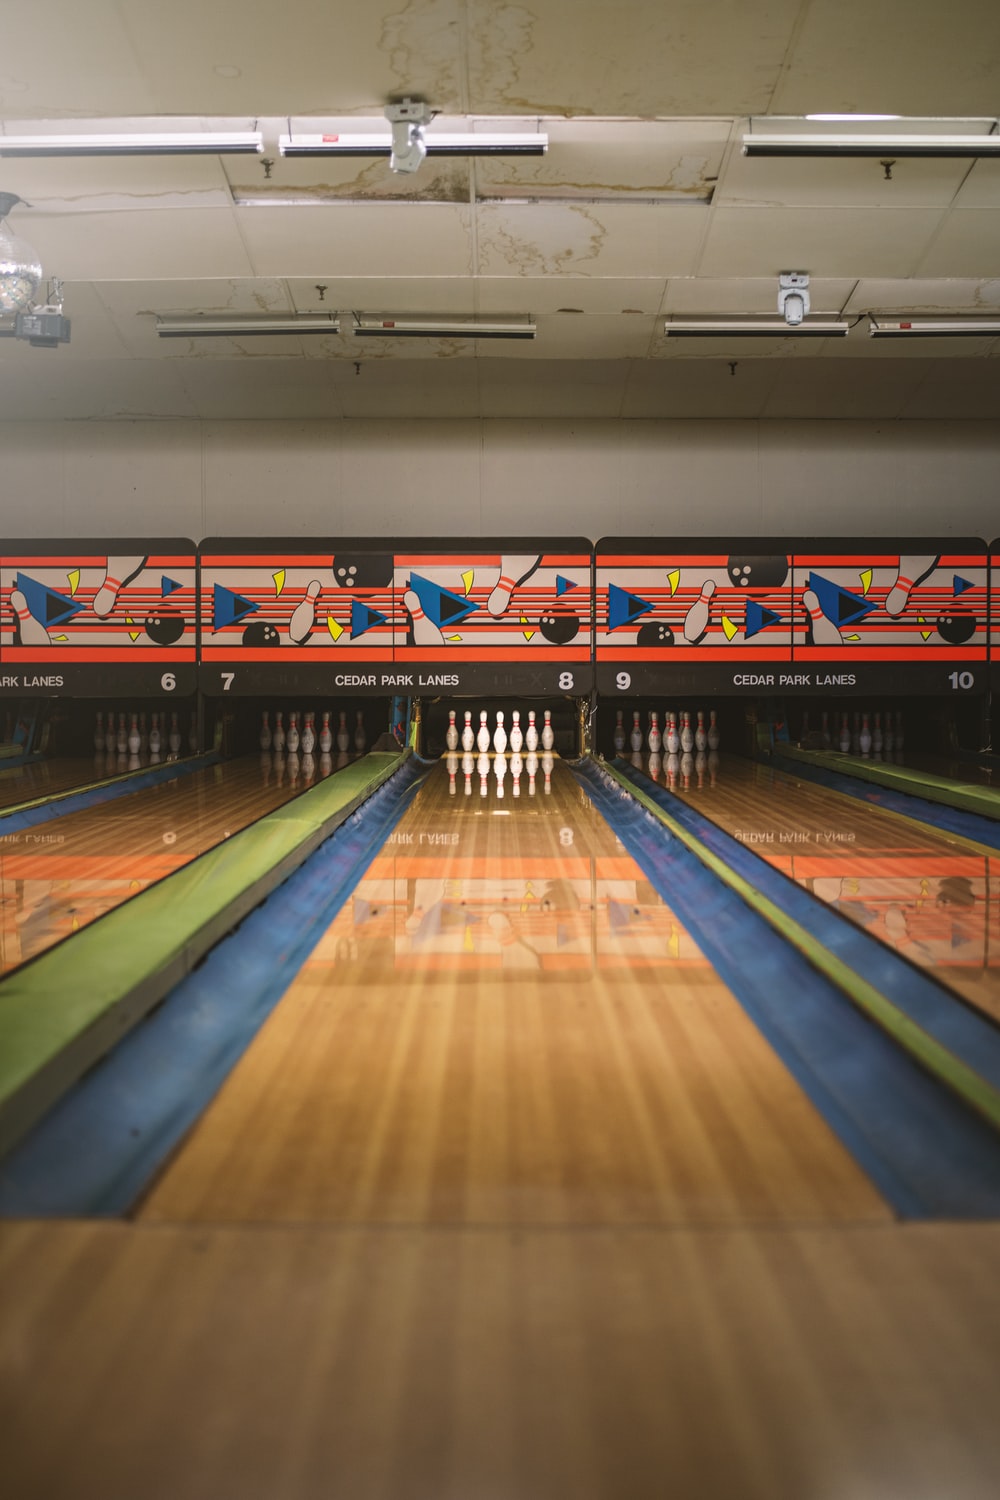 Bowling Alley Picture. Download Free Image